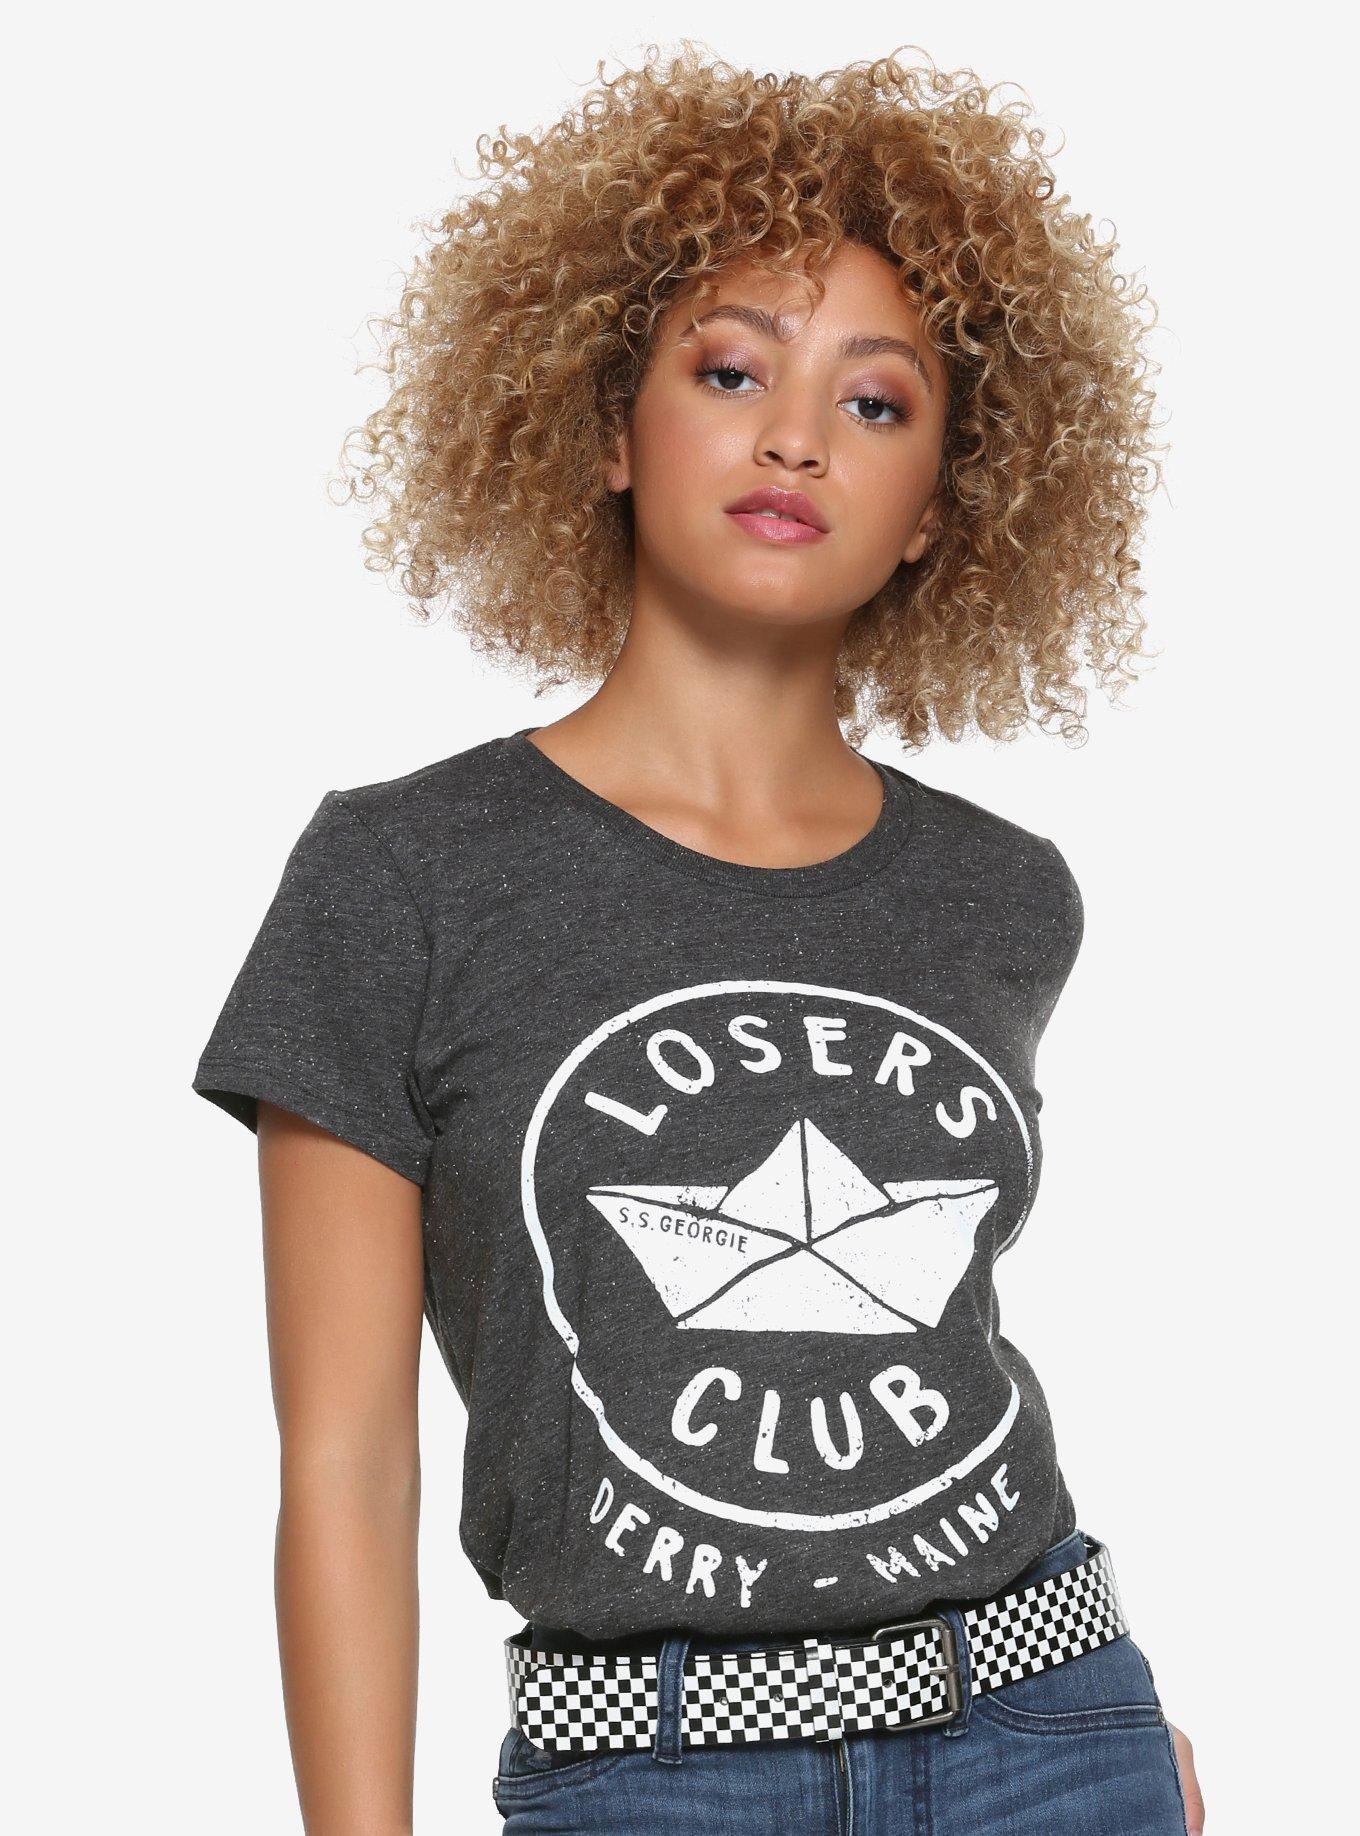 IT Pennywise Losers Club Grey Speckled Girls T-Shirt, BLACK, hi-res